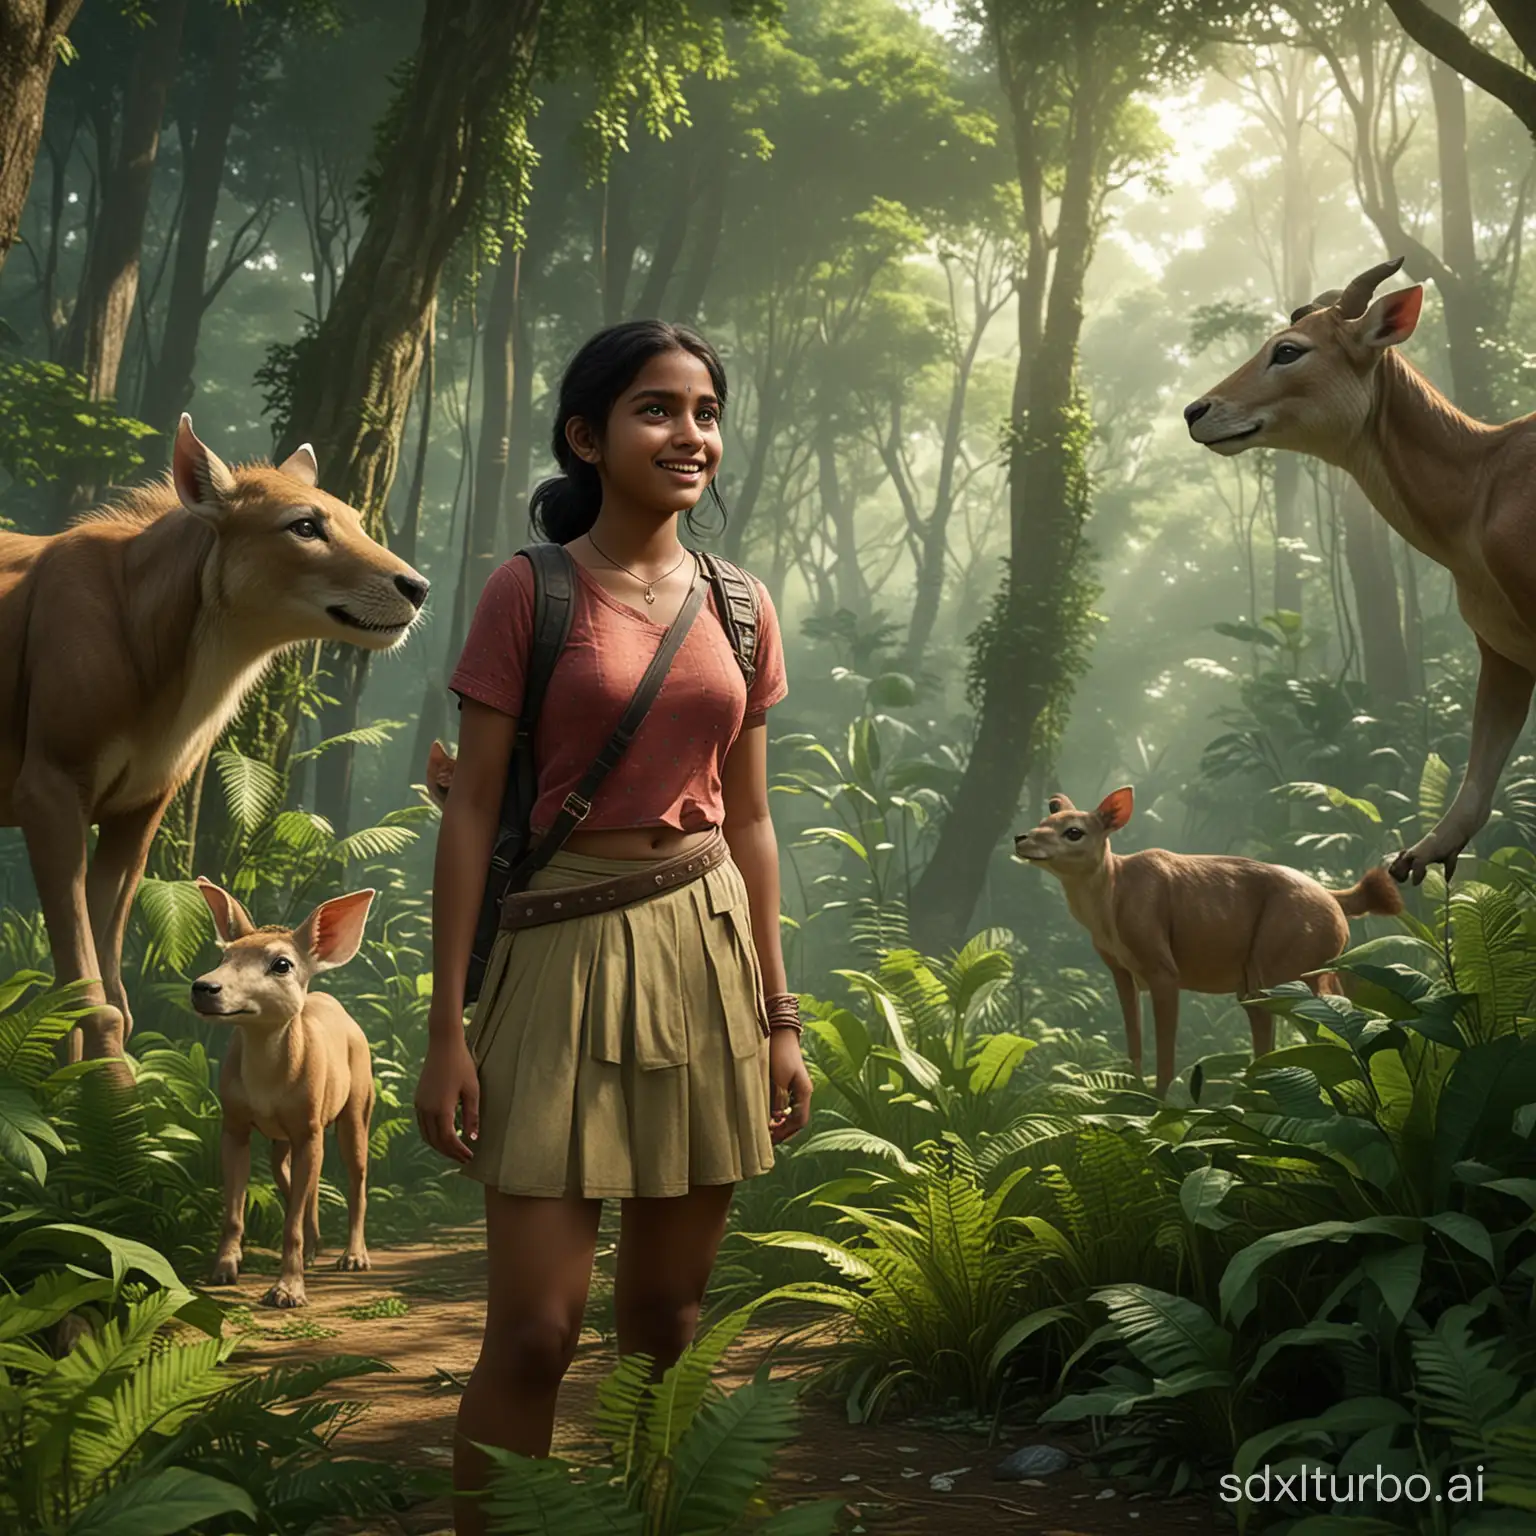 Teen-South-Indian-Girl-Lily-Explores-Magical-Forest-with-Animal-Friends